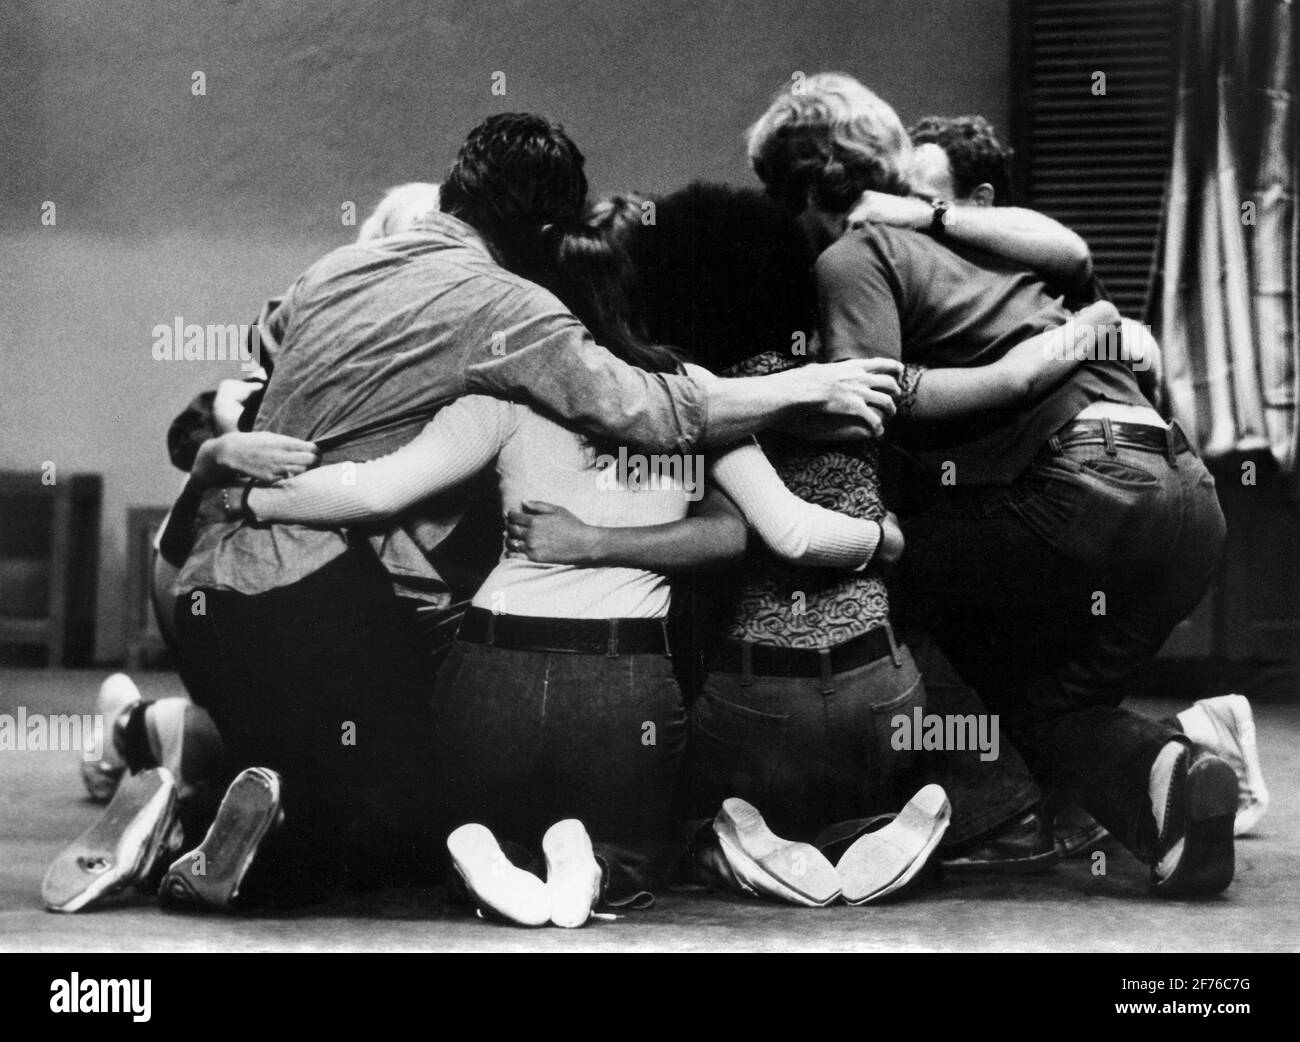 During a local playhouse drama, a group of young people kneels and bonds together during a dramatic moment. Ca. 1970. Stock Photo